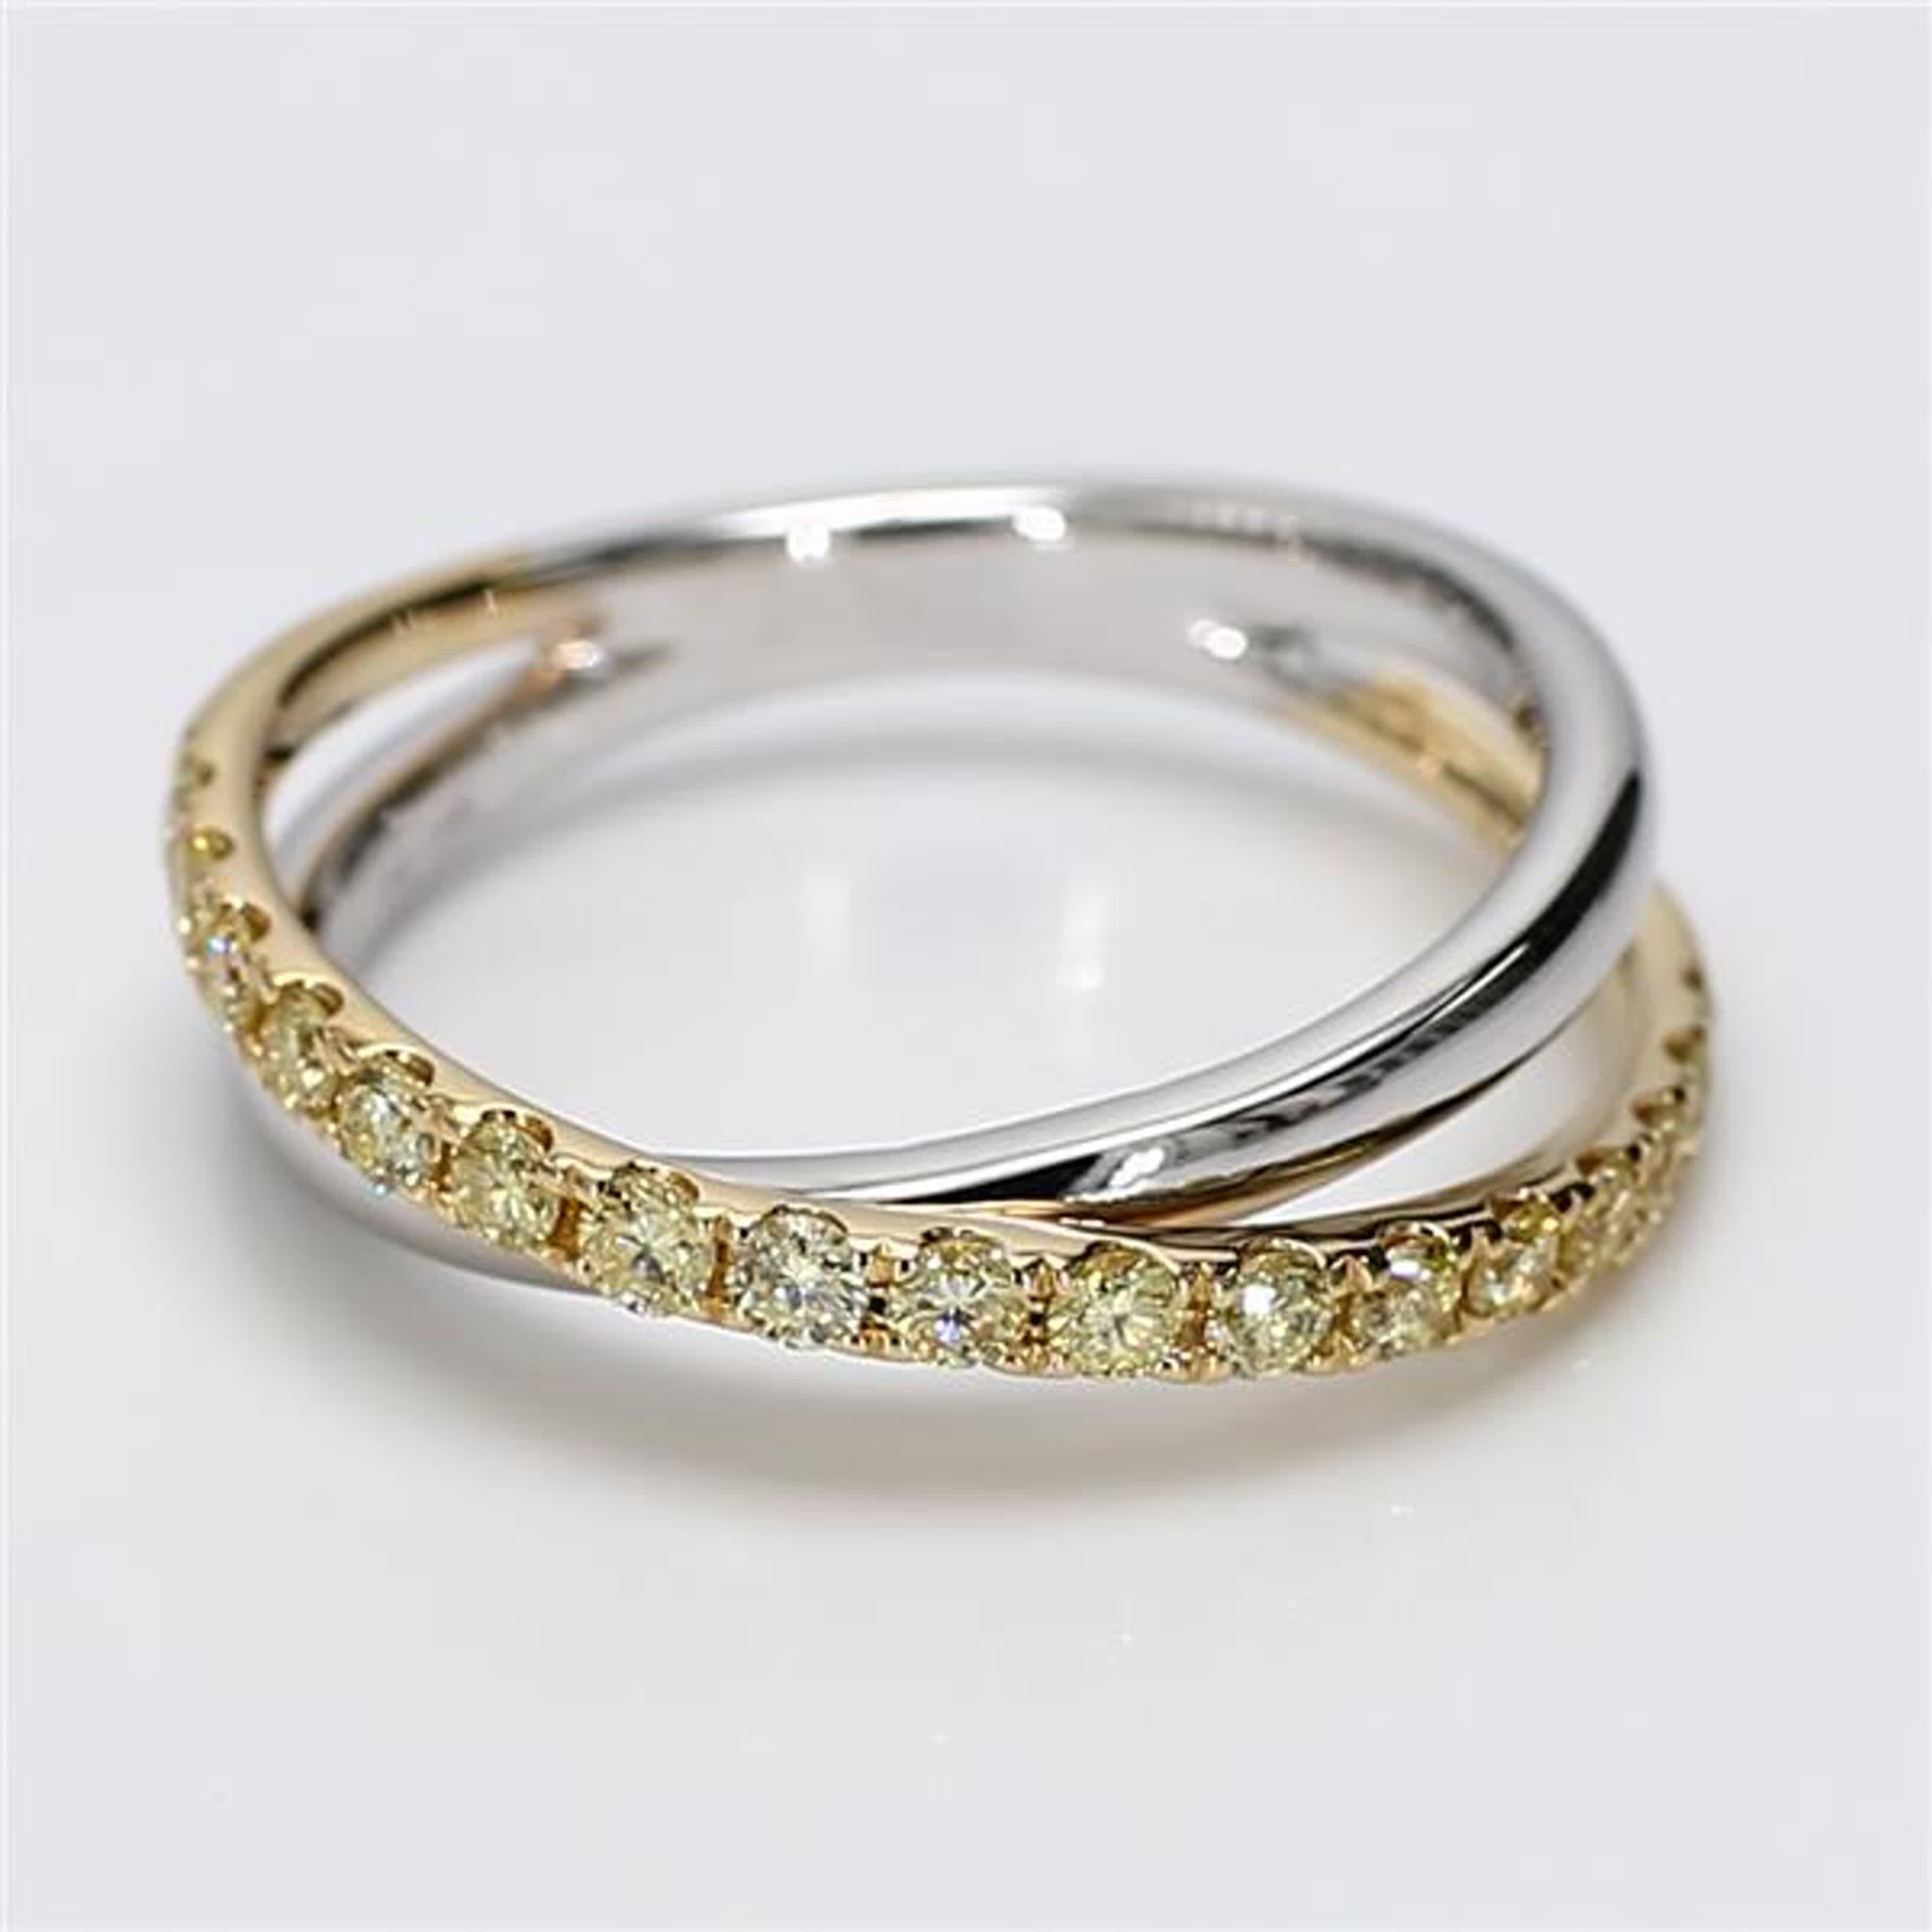 RareGemWorld's classic diamond band. Mounted in a beautiful 18K Yellow/White Gold setting with natural round yellow diamond melee. This band is guaranteed to impress and enhance your personal collection!

Total Weight: .47cts

Length x Width: 21.1 x